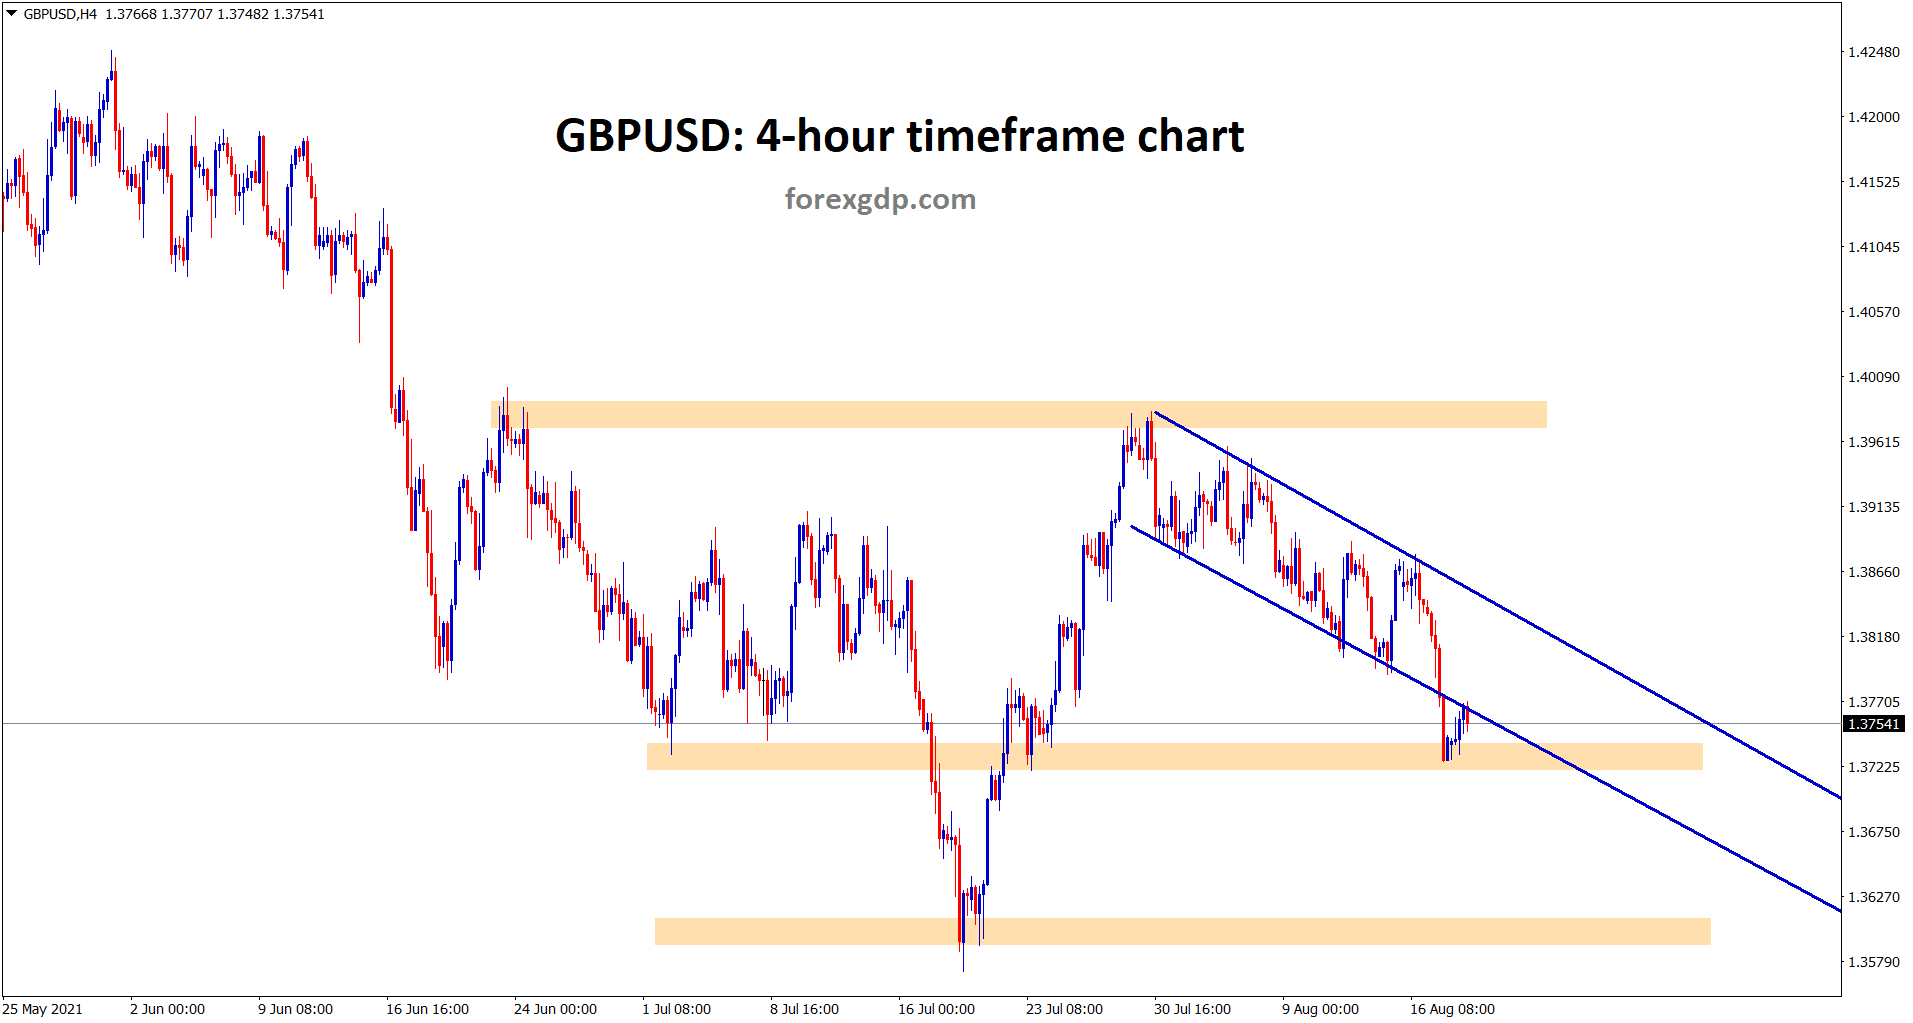 GBPUSD is at the restest area of the descending channel line